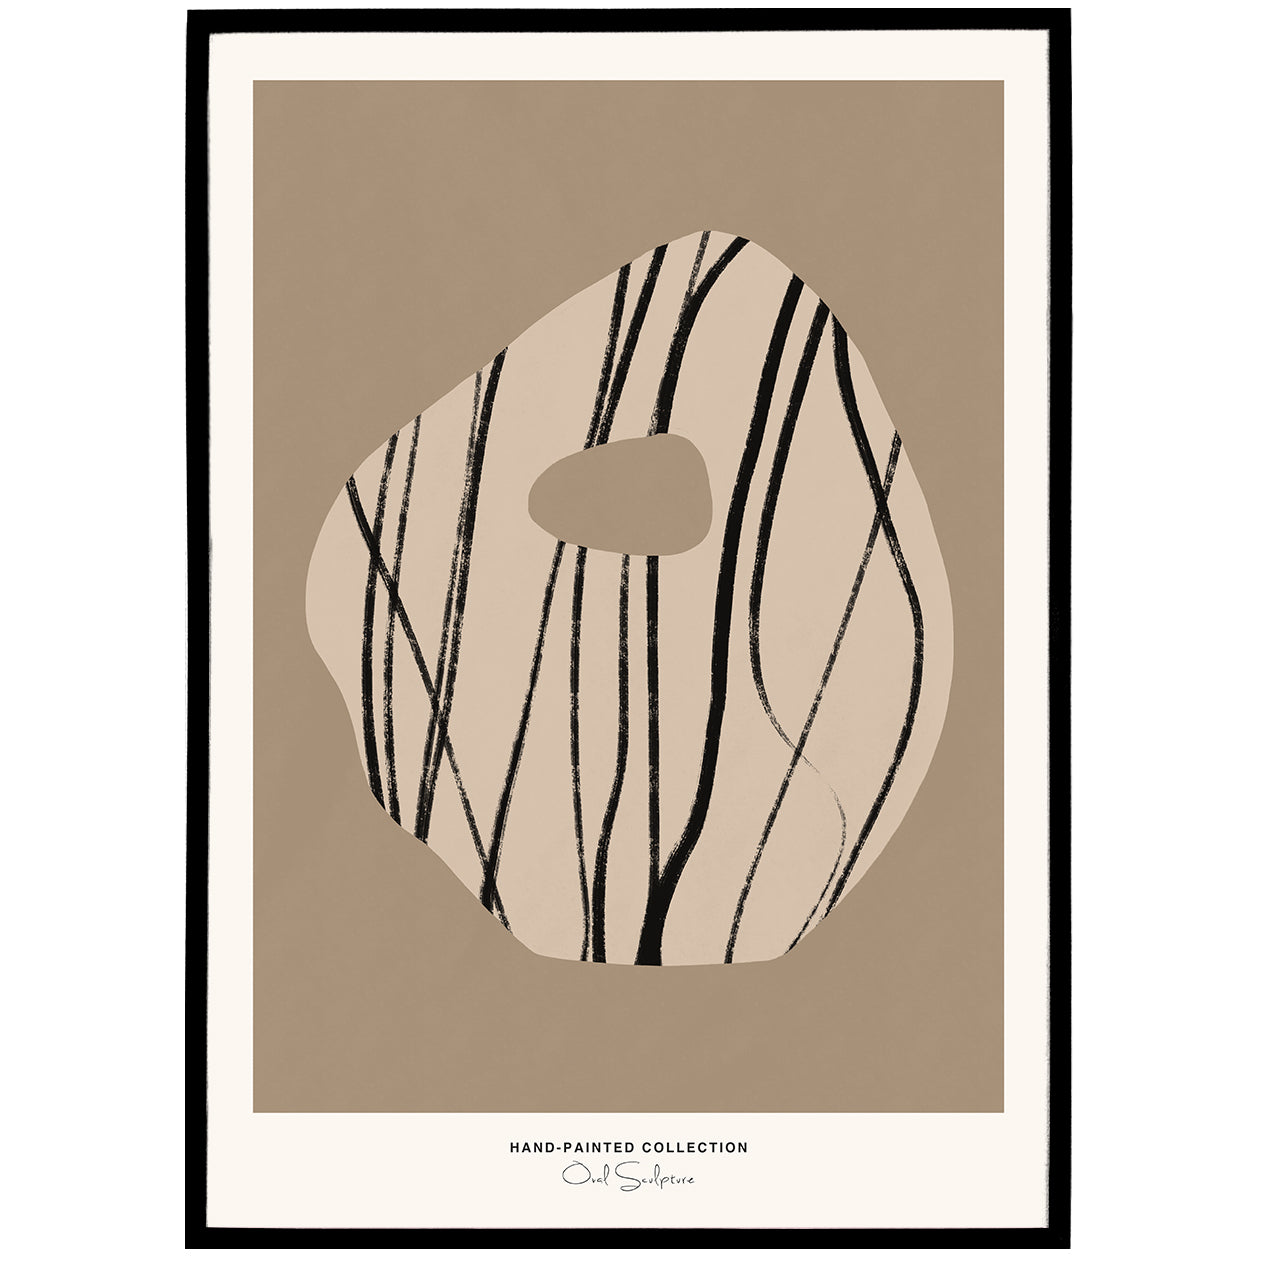 Oval Sculpture | Hand-Painted Collection Poster